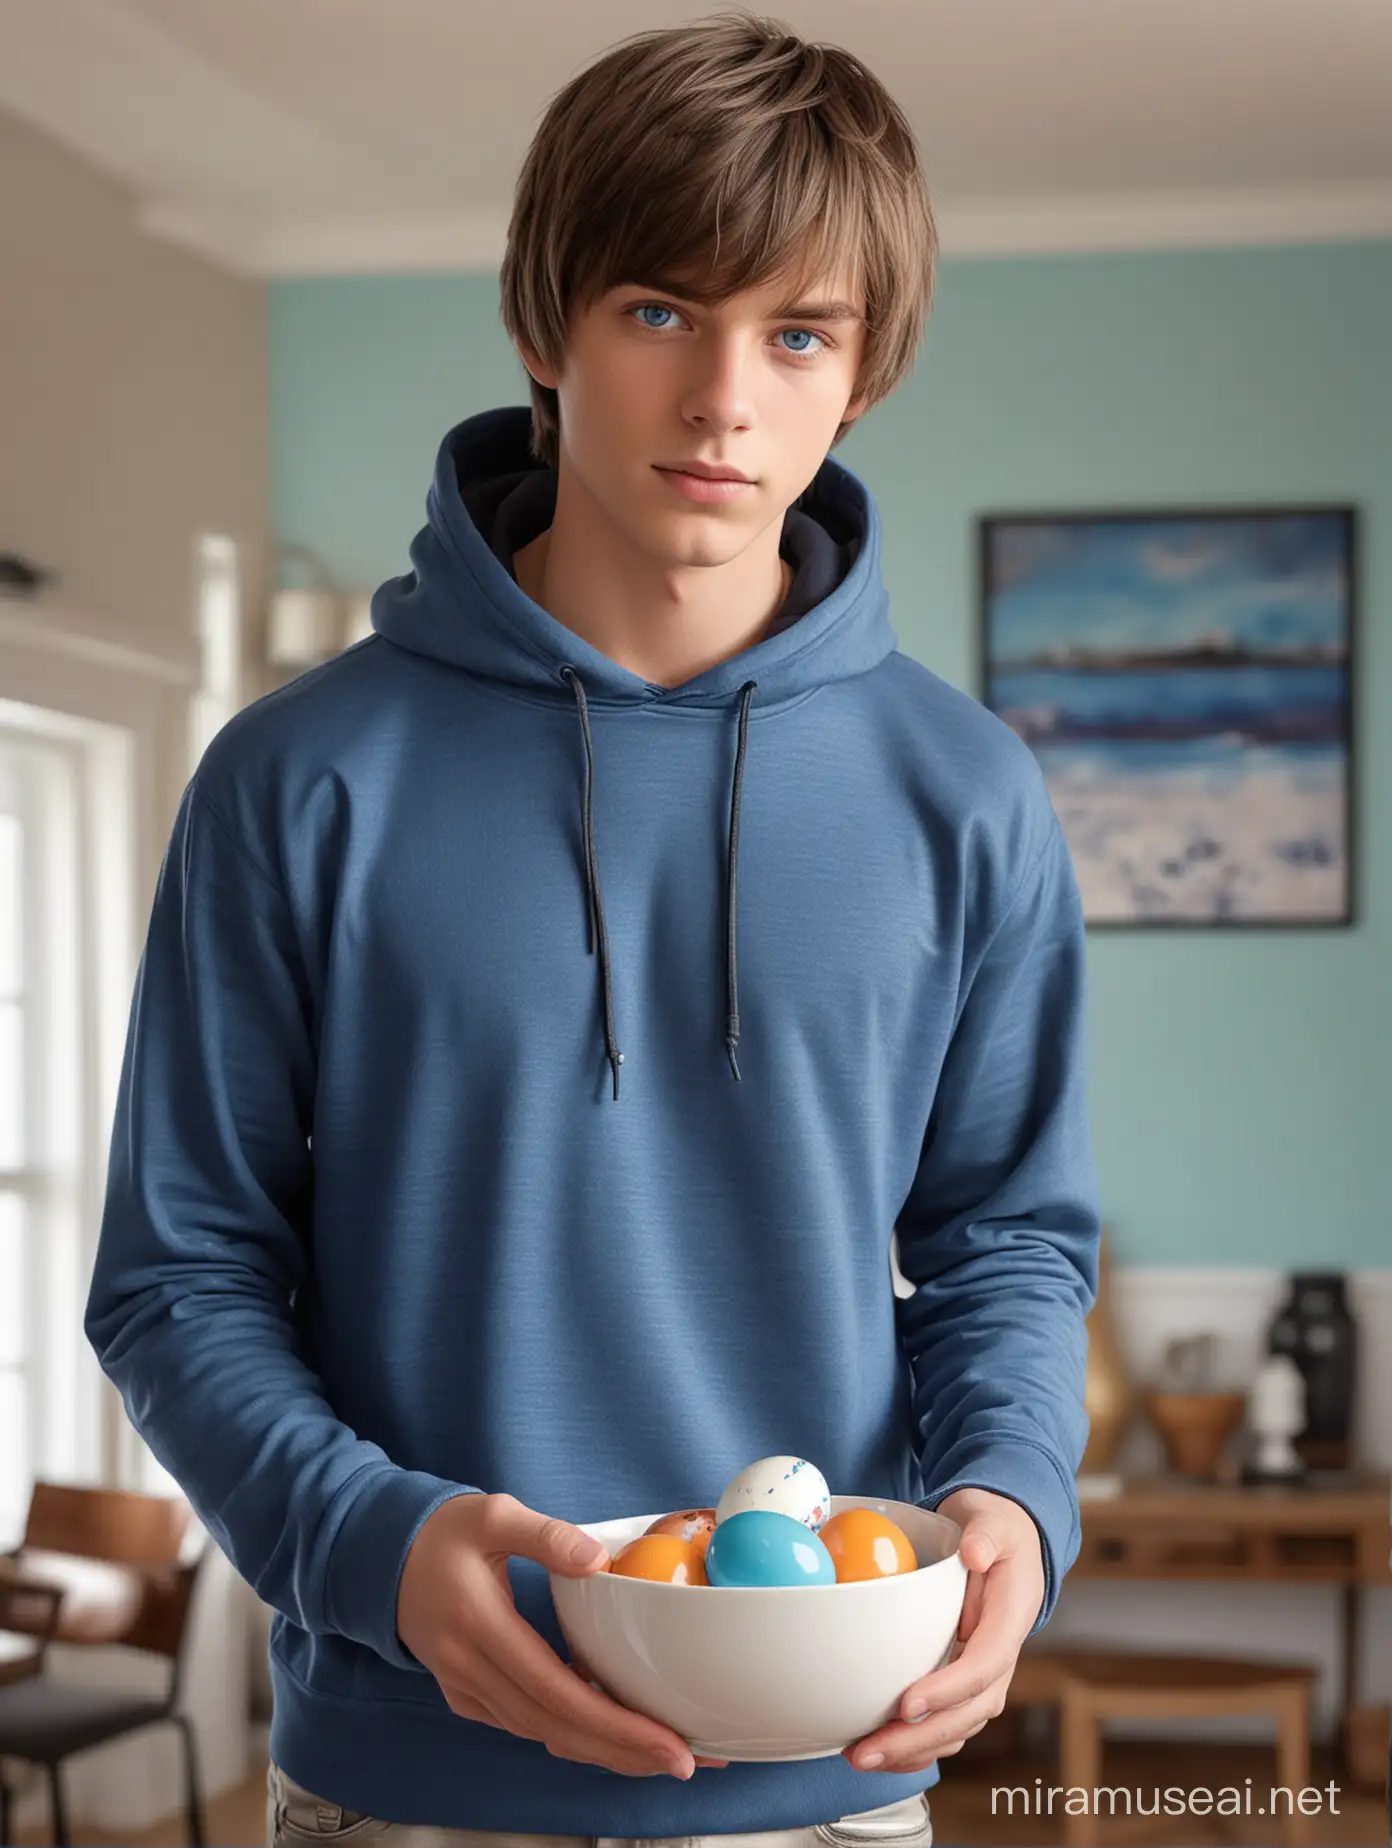 Attractive Teen Holding Colorful Easter Eggs in Room